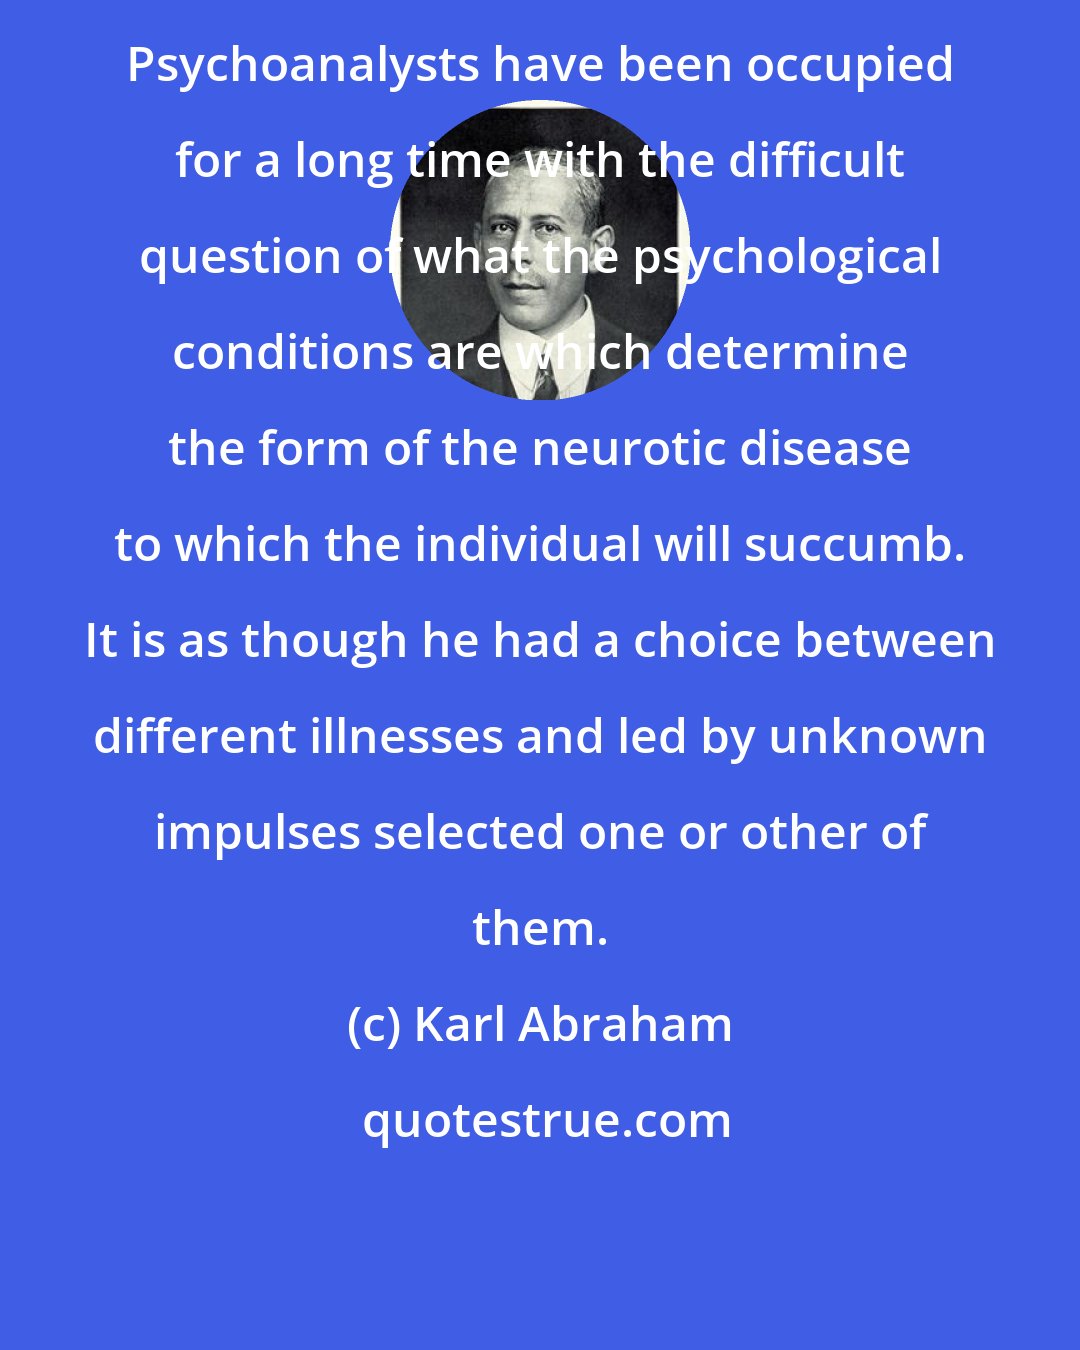 Karl Abraham: Psychoanalysts have been occupied for a long time with the difficult question of what the psychological conditions are which determine the form of the neurotic disease to which the individual will succumb. It is as though he had a choice between different illnesses and led by unknown impulses selected one or other of them.